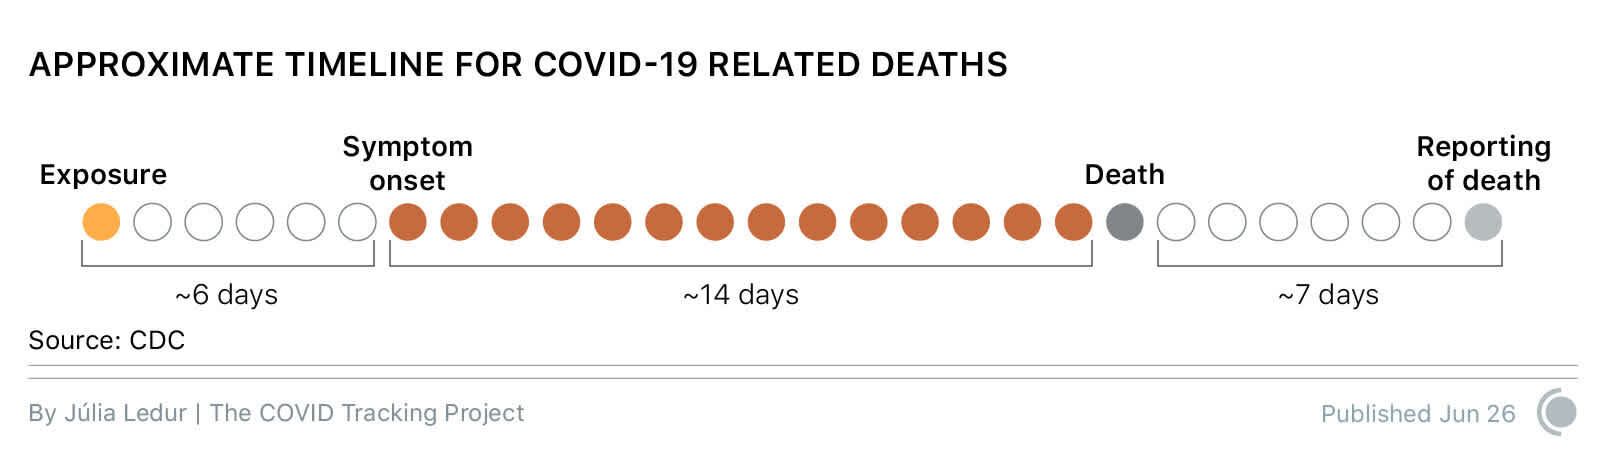 Graphic illustrating the ~6 day delay between exposure and onset, the average ~14 day delay between onset and death for those who die of COVID-19, and the ~7 day delay in reporting the death.